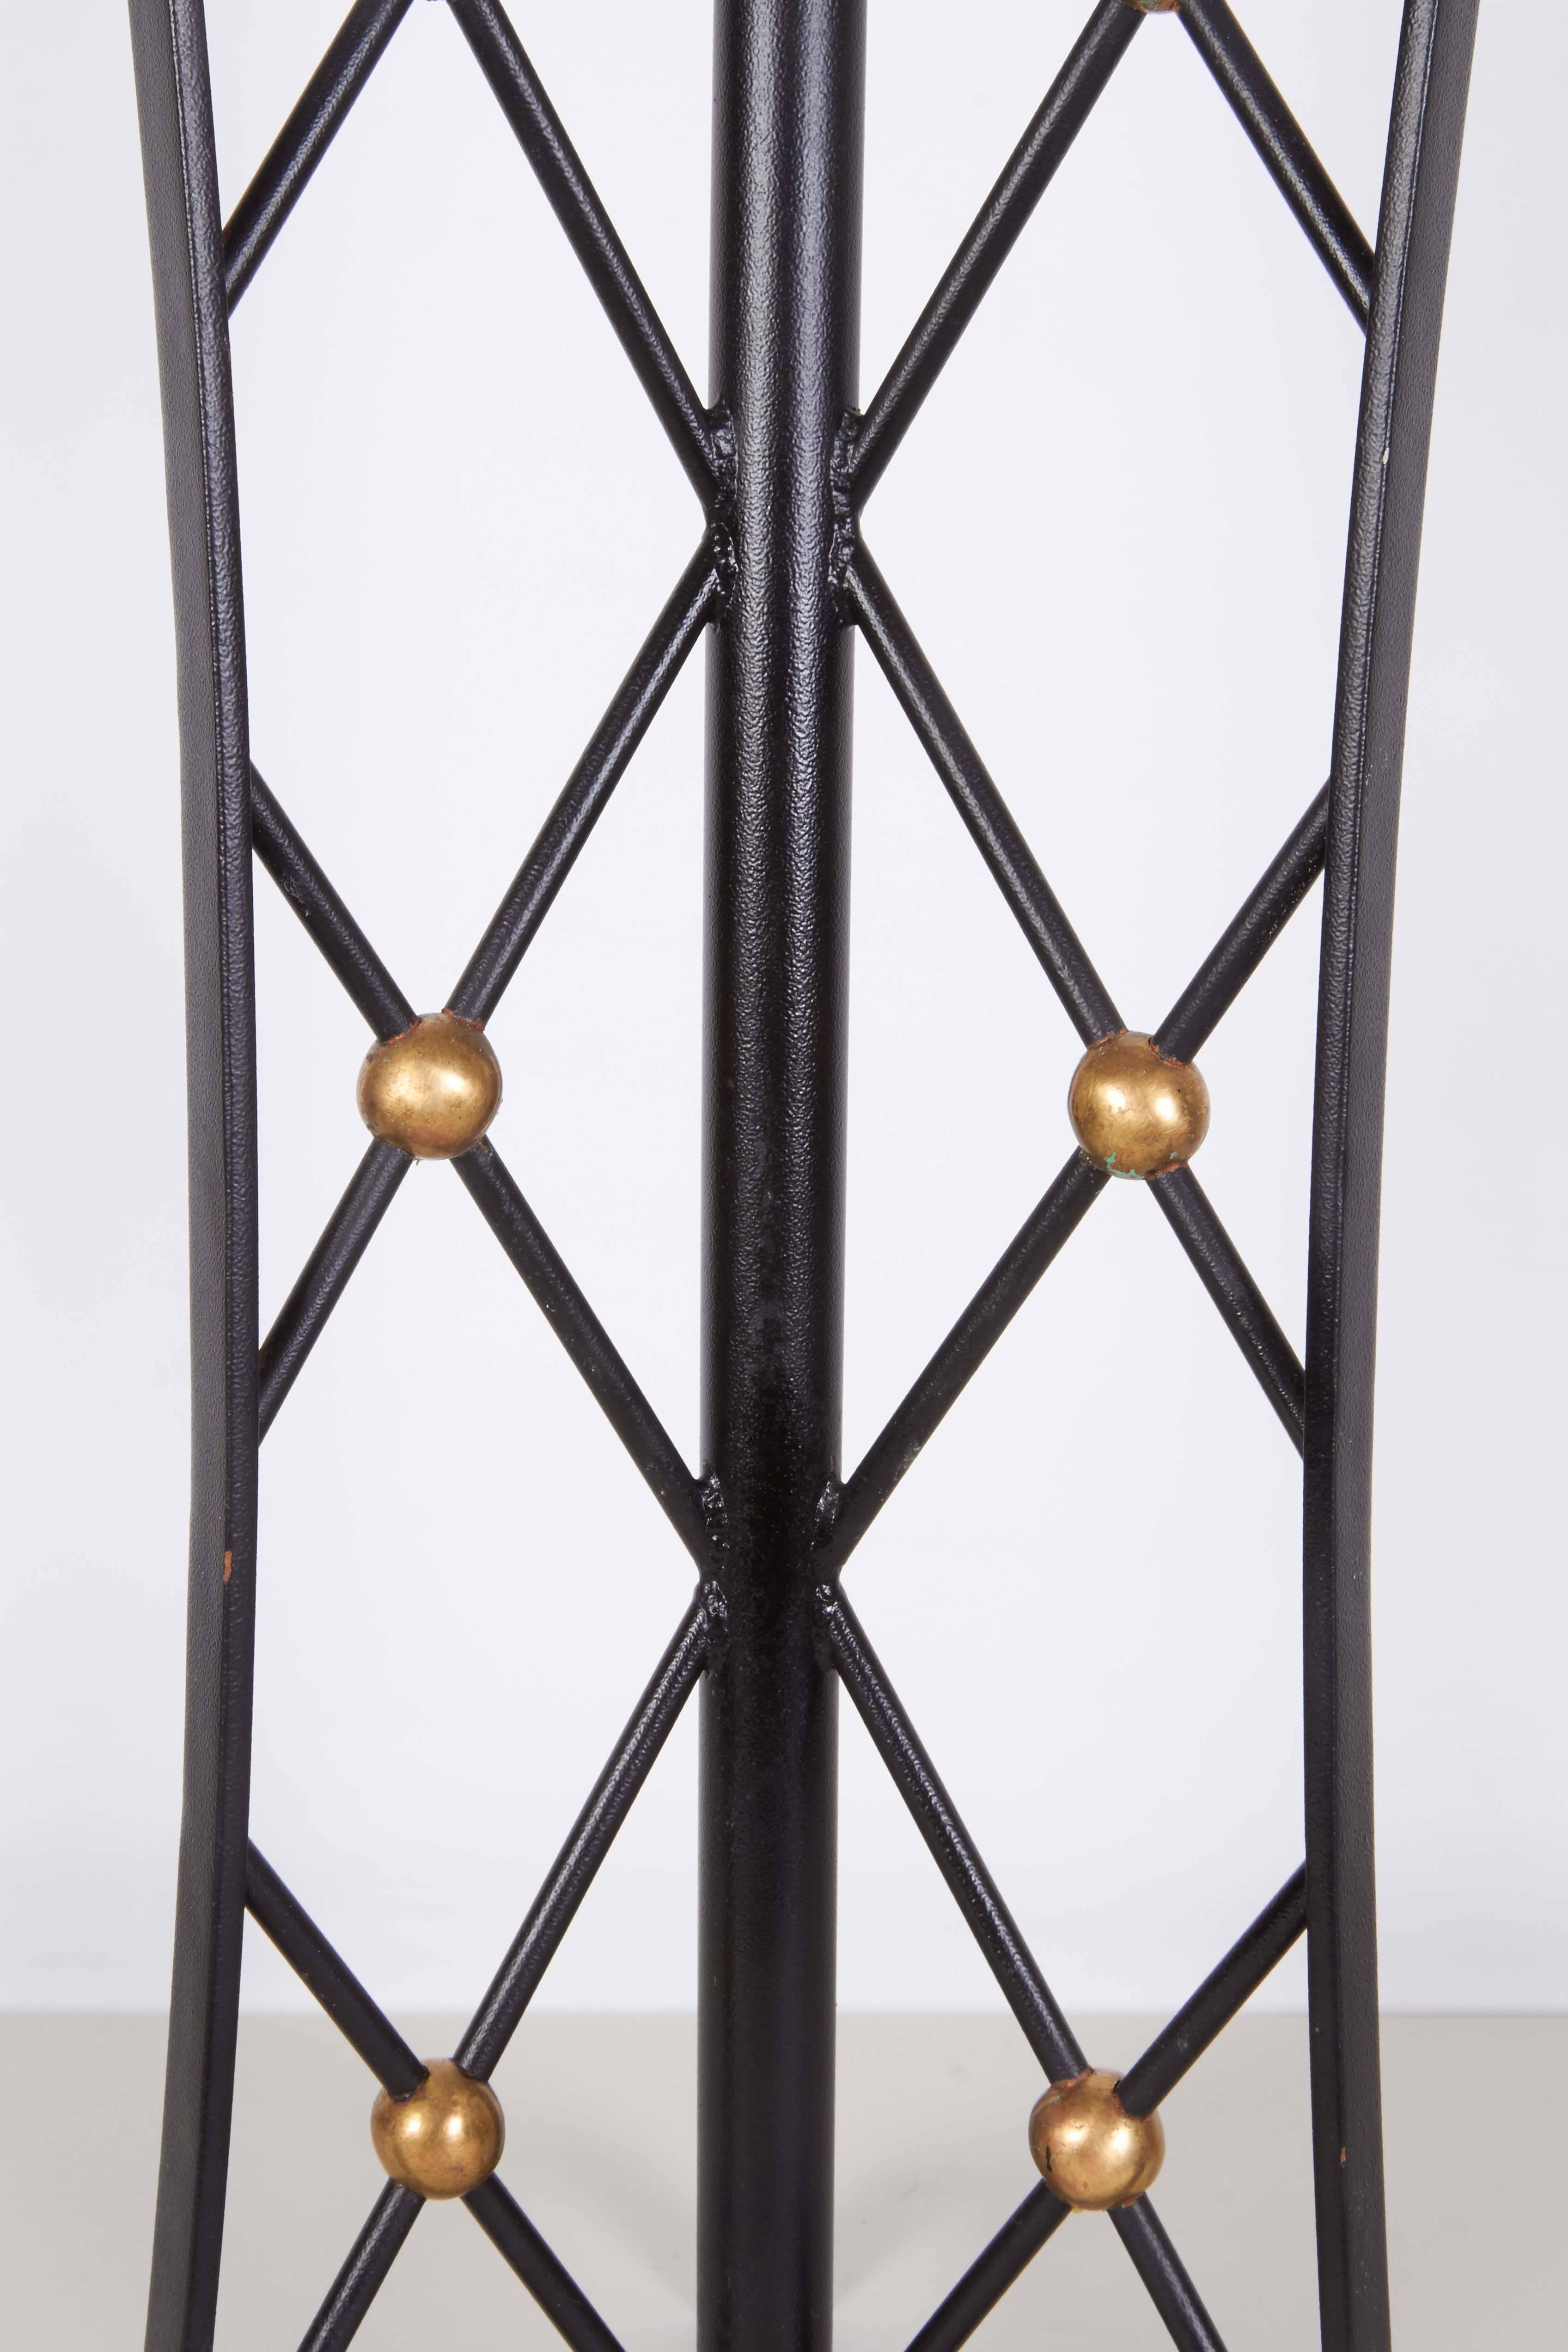 A pair of table lamps, styled after Jean Royère's signature 'Tour Eiffel' designs, in black painted wrought iron, with three panels of lattice brackets (otherwise 'croisillons'), with intersecting brass-plated accent balls, on tripod legs. Each